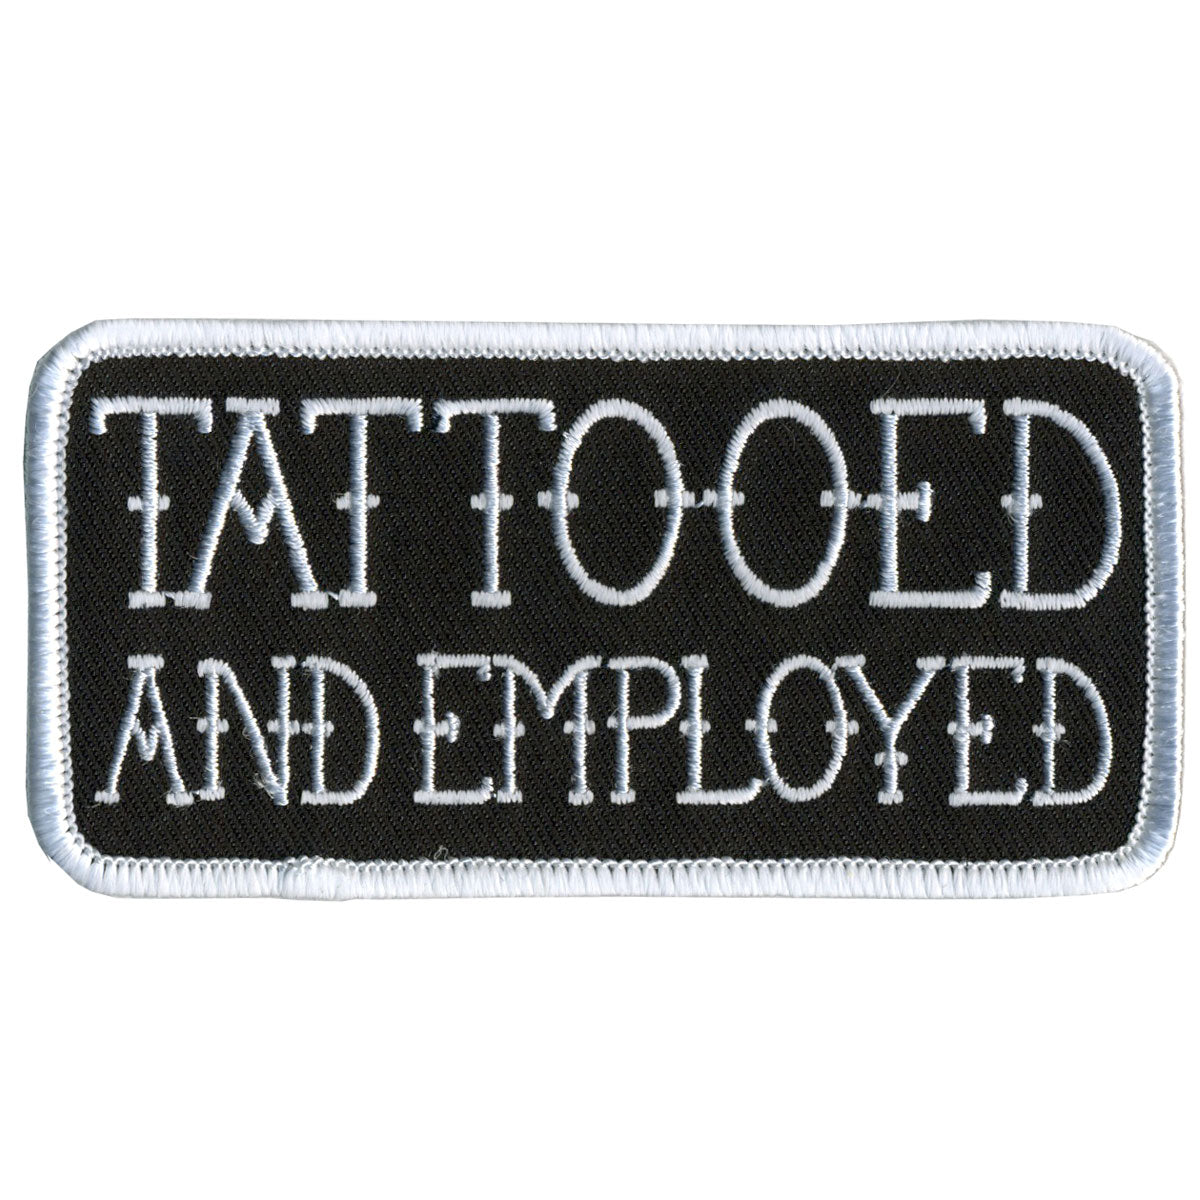 Hot Leathers Tattooed and Employed 4" x 2" Patch